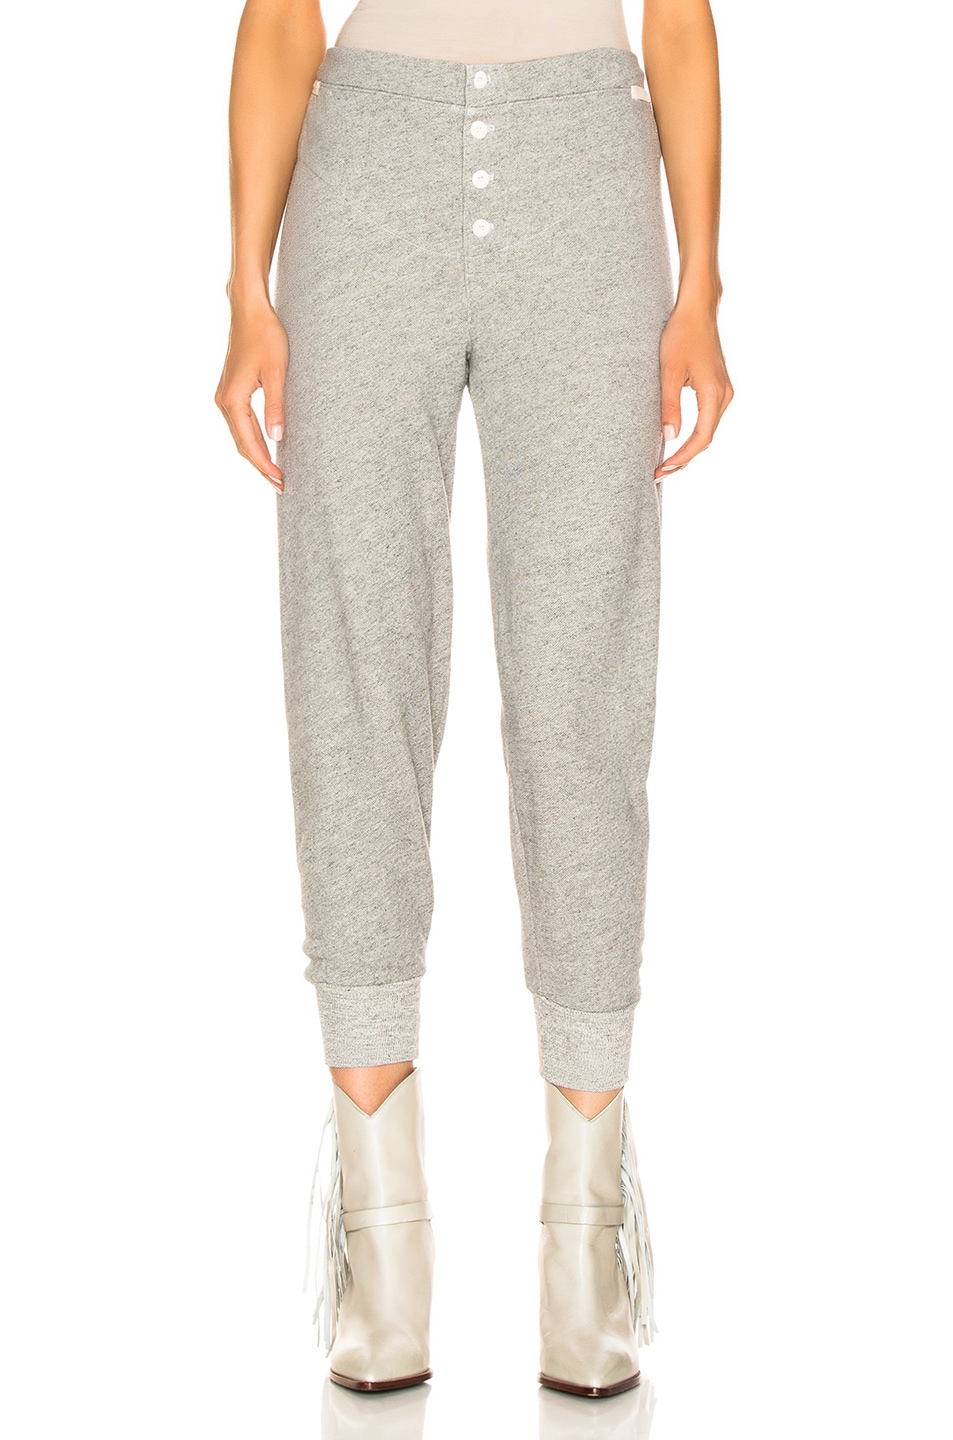 Image 1 of The Great Cabin Sweatpant in Varsity Grey